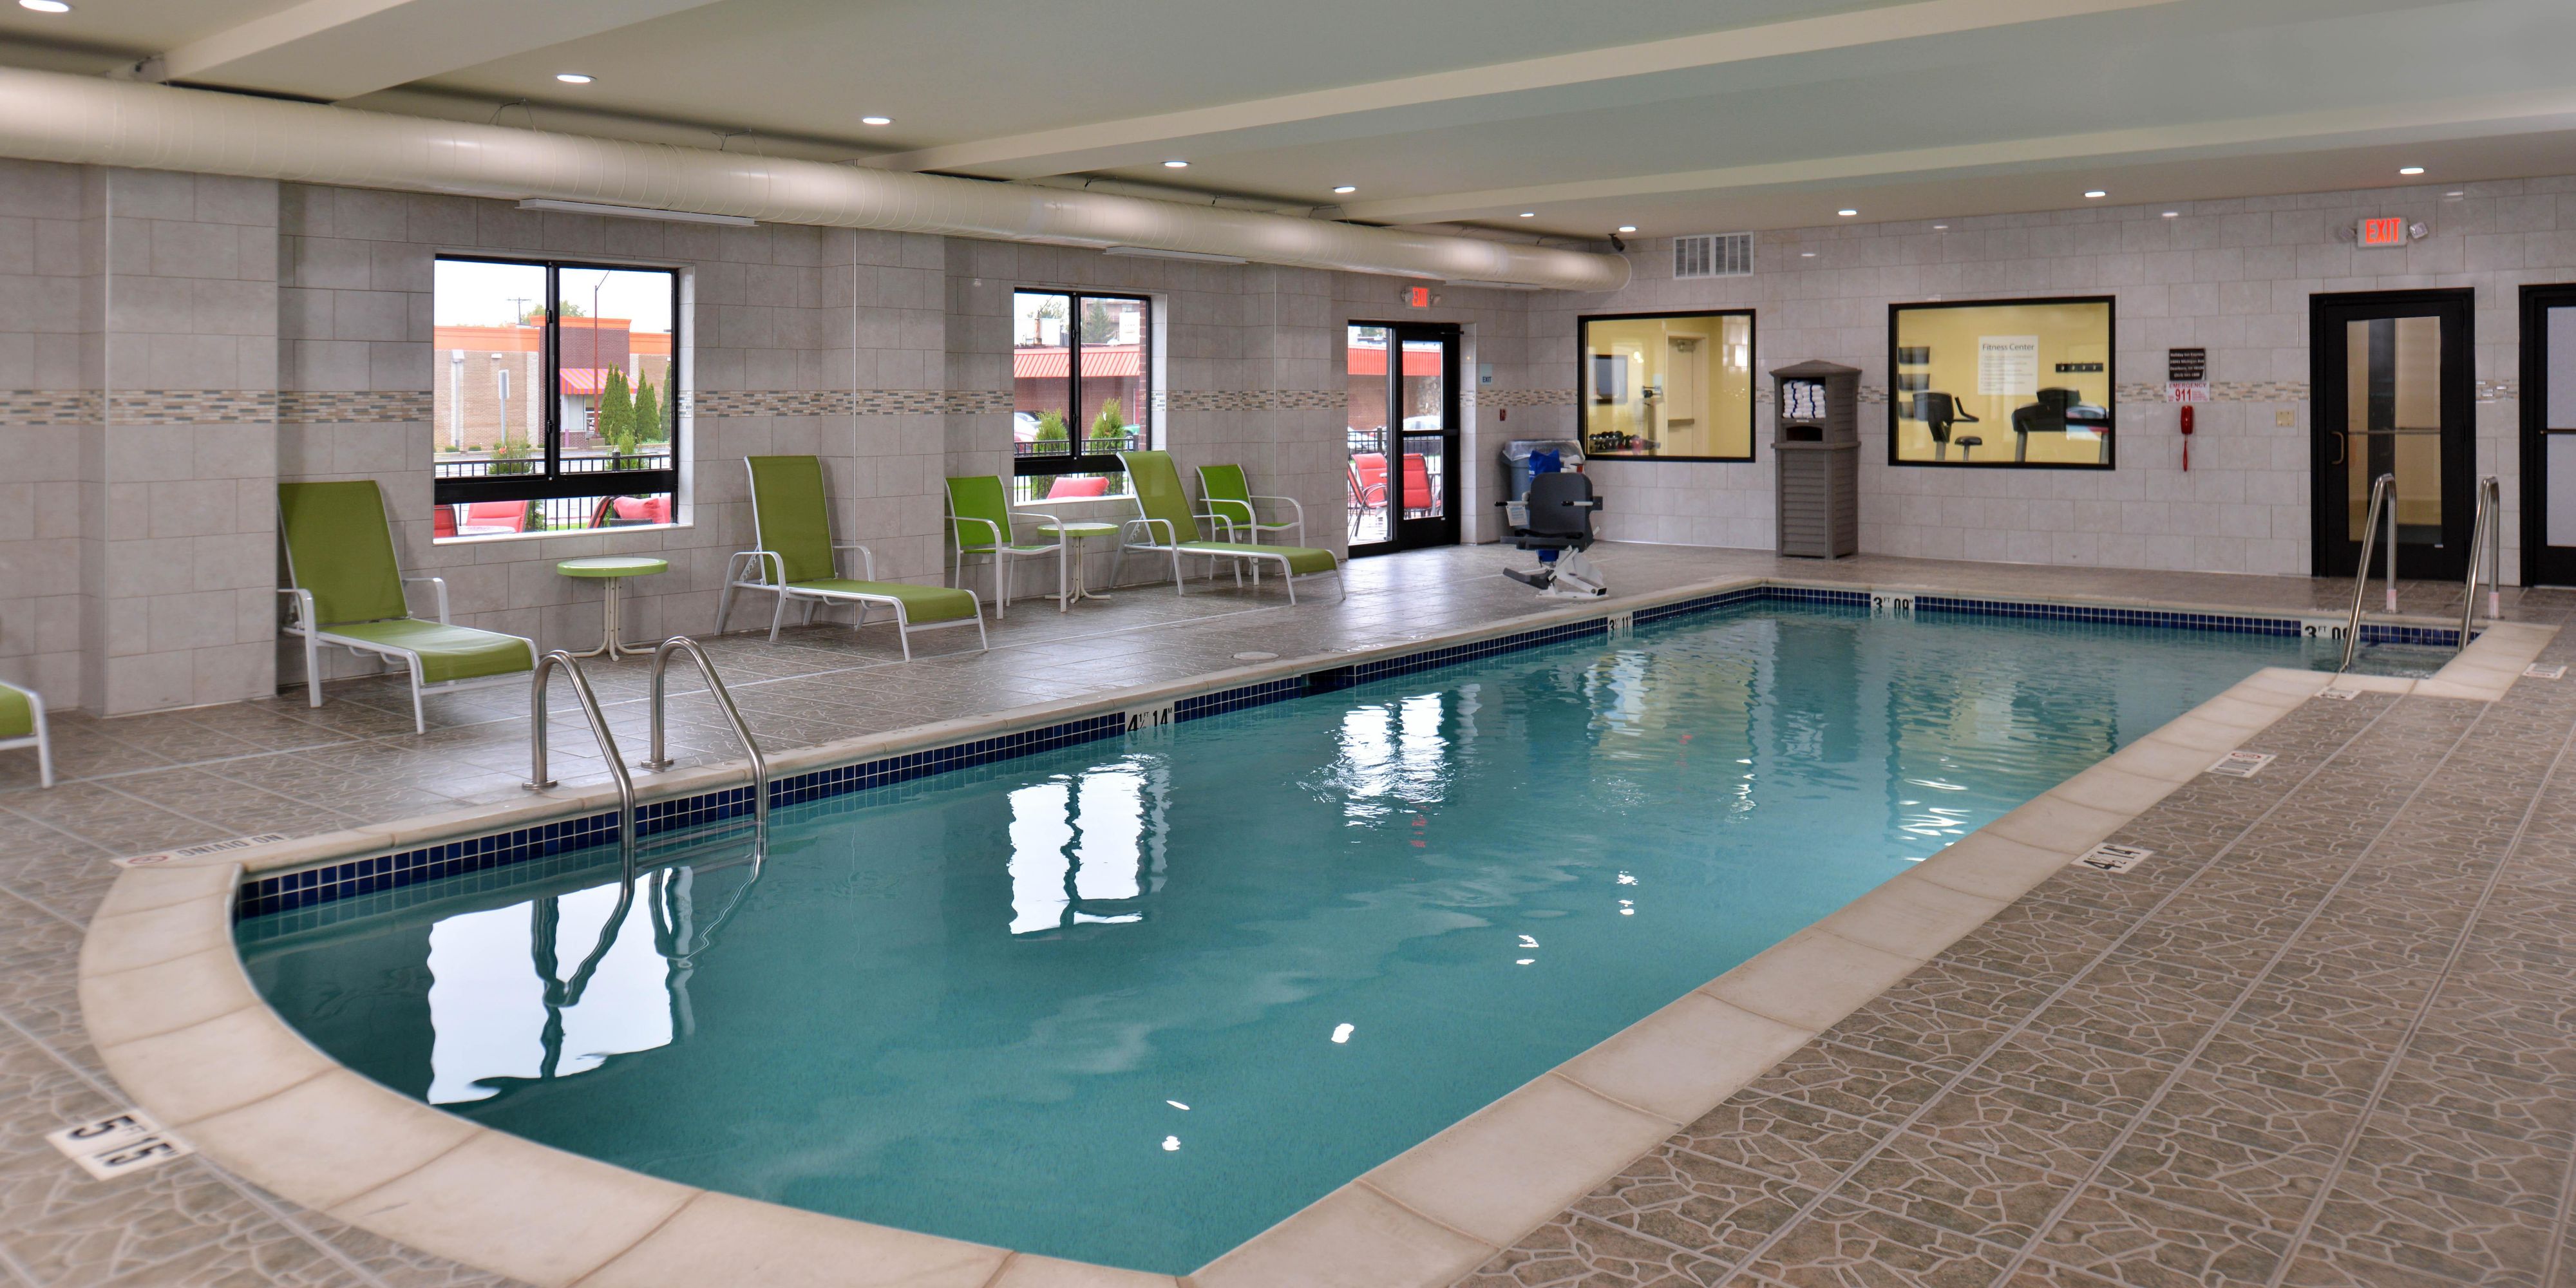 Enjoy our indoor heated pool after a long day at work!